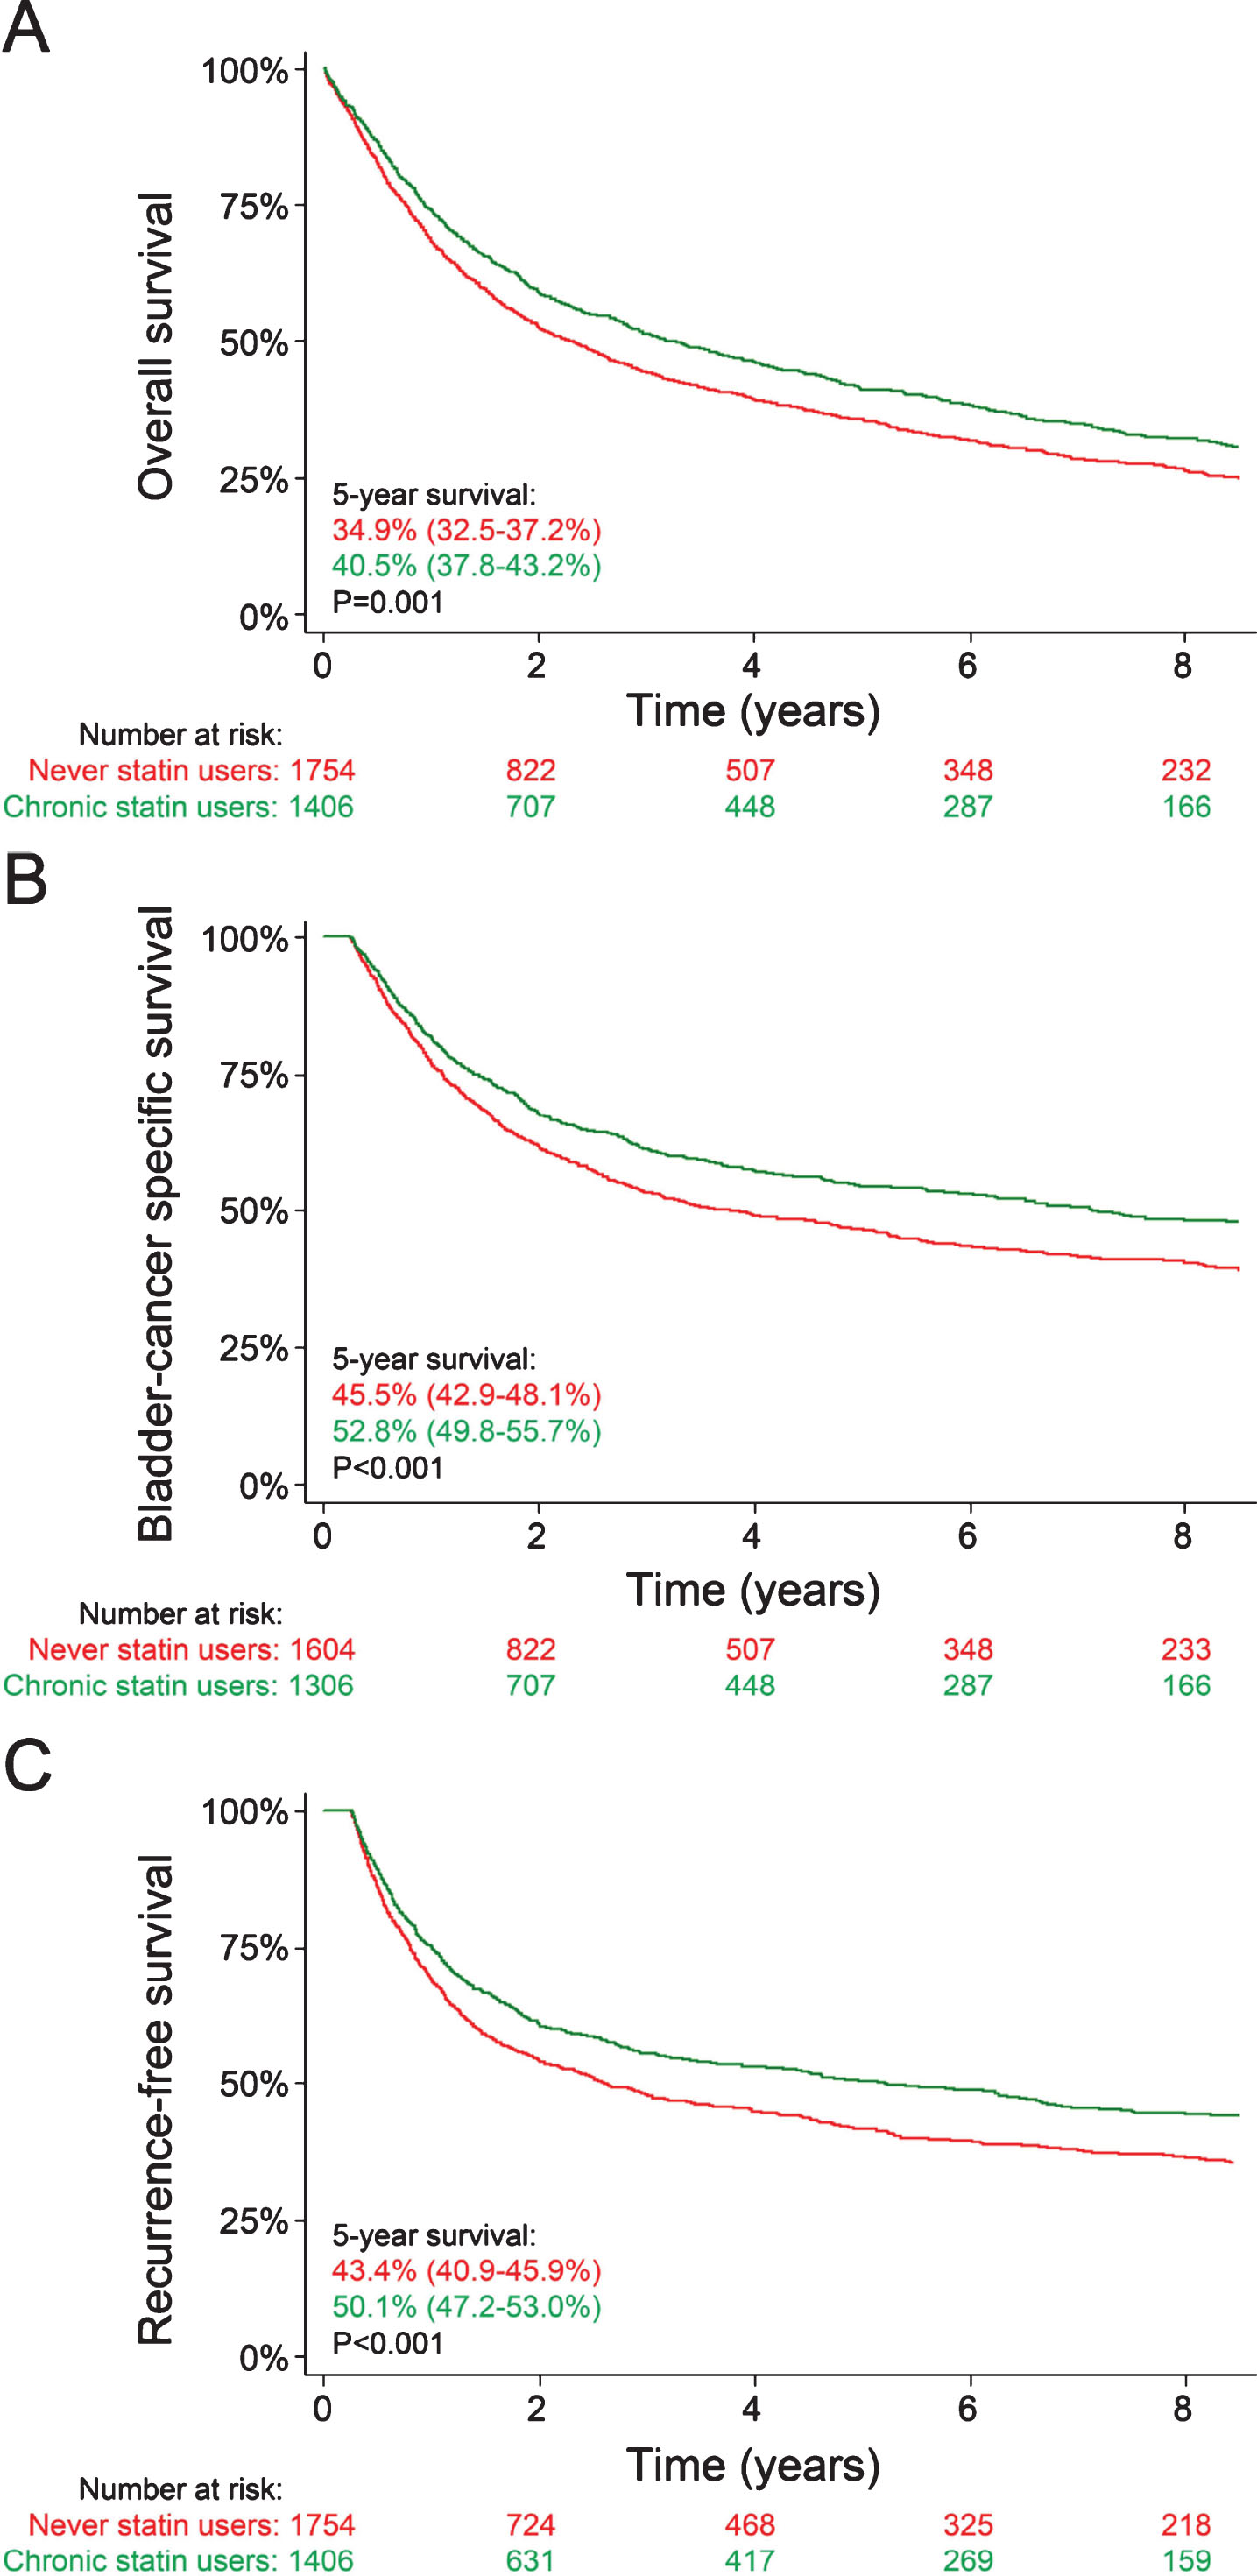 Overall survival (A), bladder cancer-specific survival (B), and time to recurrence (C) in patients who chronically used statins prior to surgery (green line) and never statin users (red line). Values depict five-year survival rates with their respective 95% confidence intervals. P-values were calculated using log-rank tests.